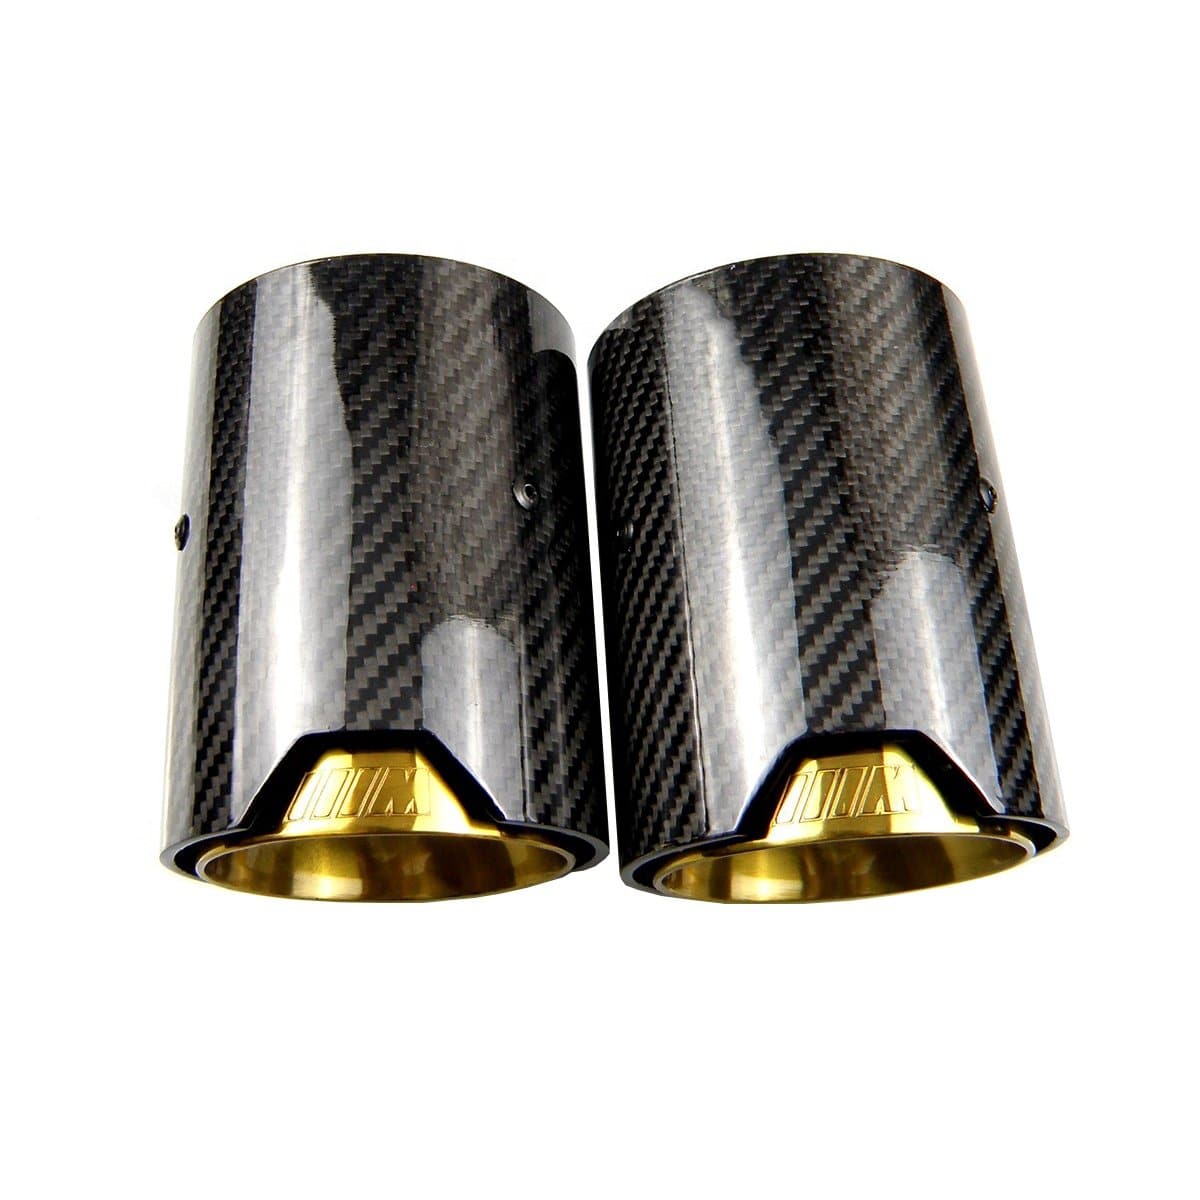 BMW F20 F21 M135I M140I Carbon Fibre Gold M Performance Style Exhaust Tips Set (2014 - 2019) M Performance look whether you have the M Performance Exhaust or not - M135I or M140I those M Performance looks without needing the M Performance Rear Section. BMW F20 1 Series M135I M140I BMW F21 1 Series M135I M140I